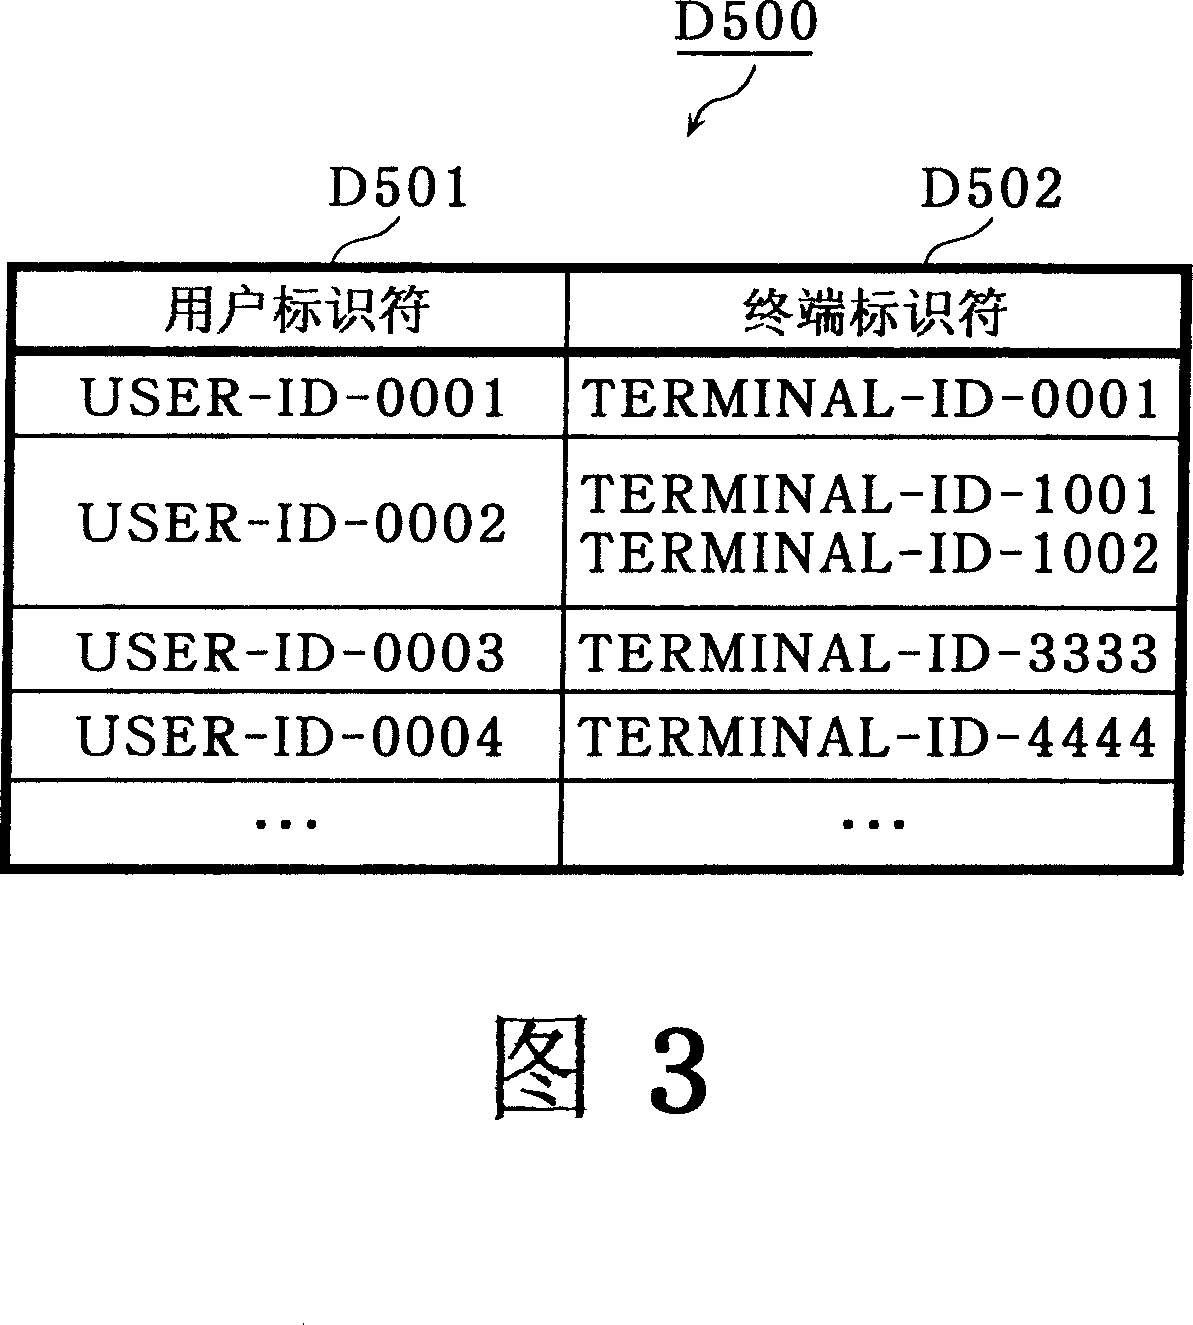 Contents using device, and contents using method